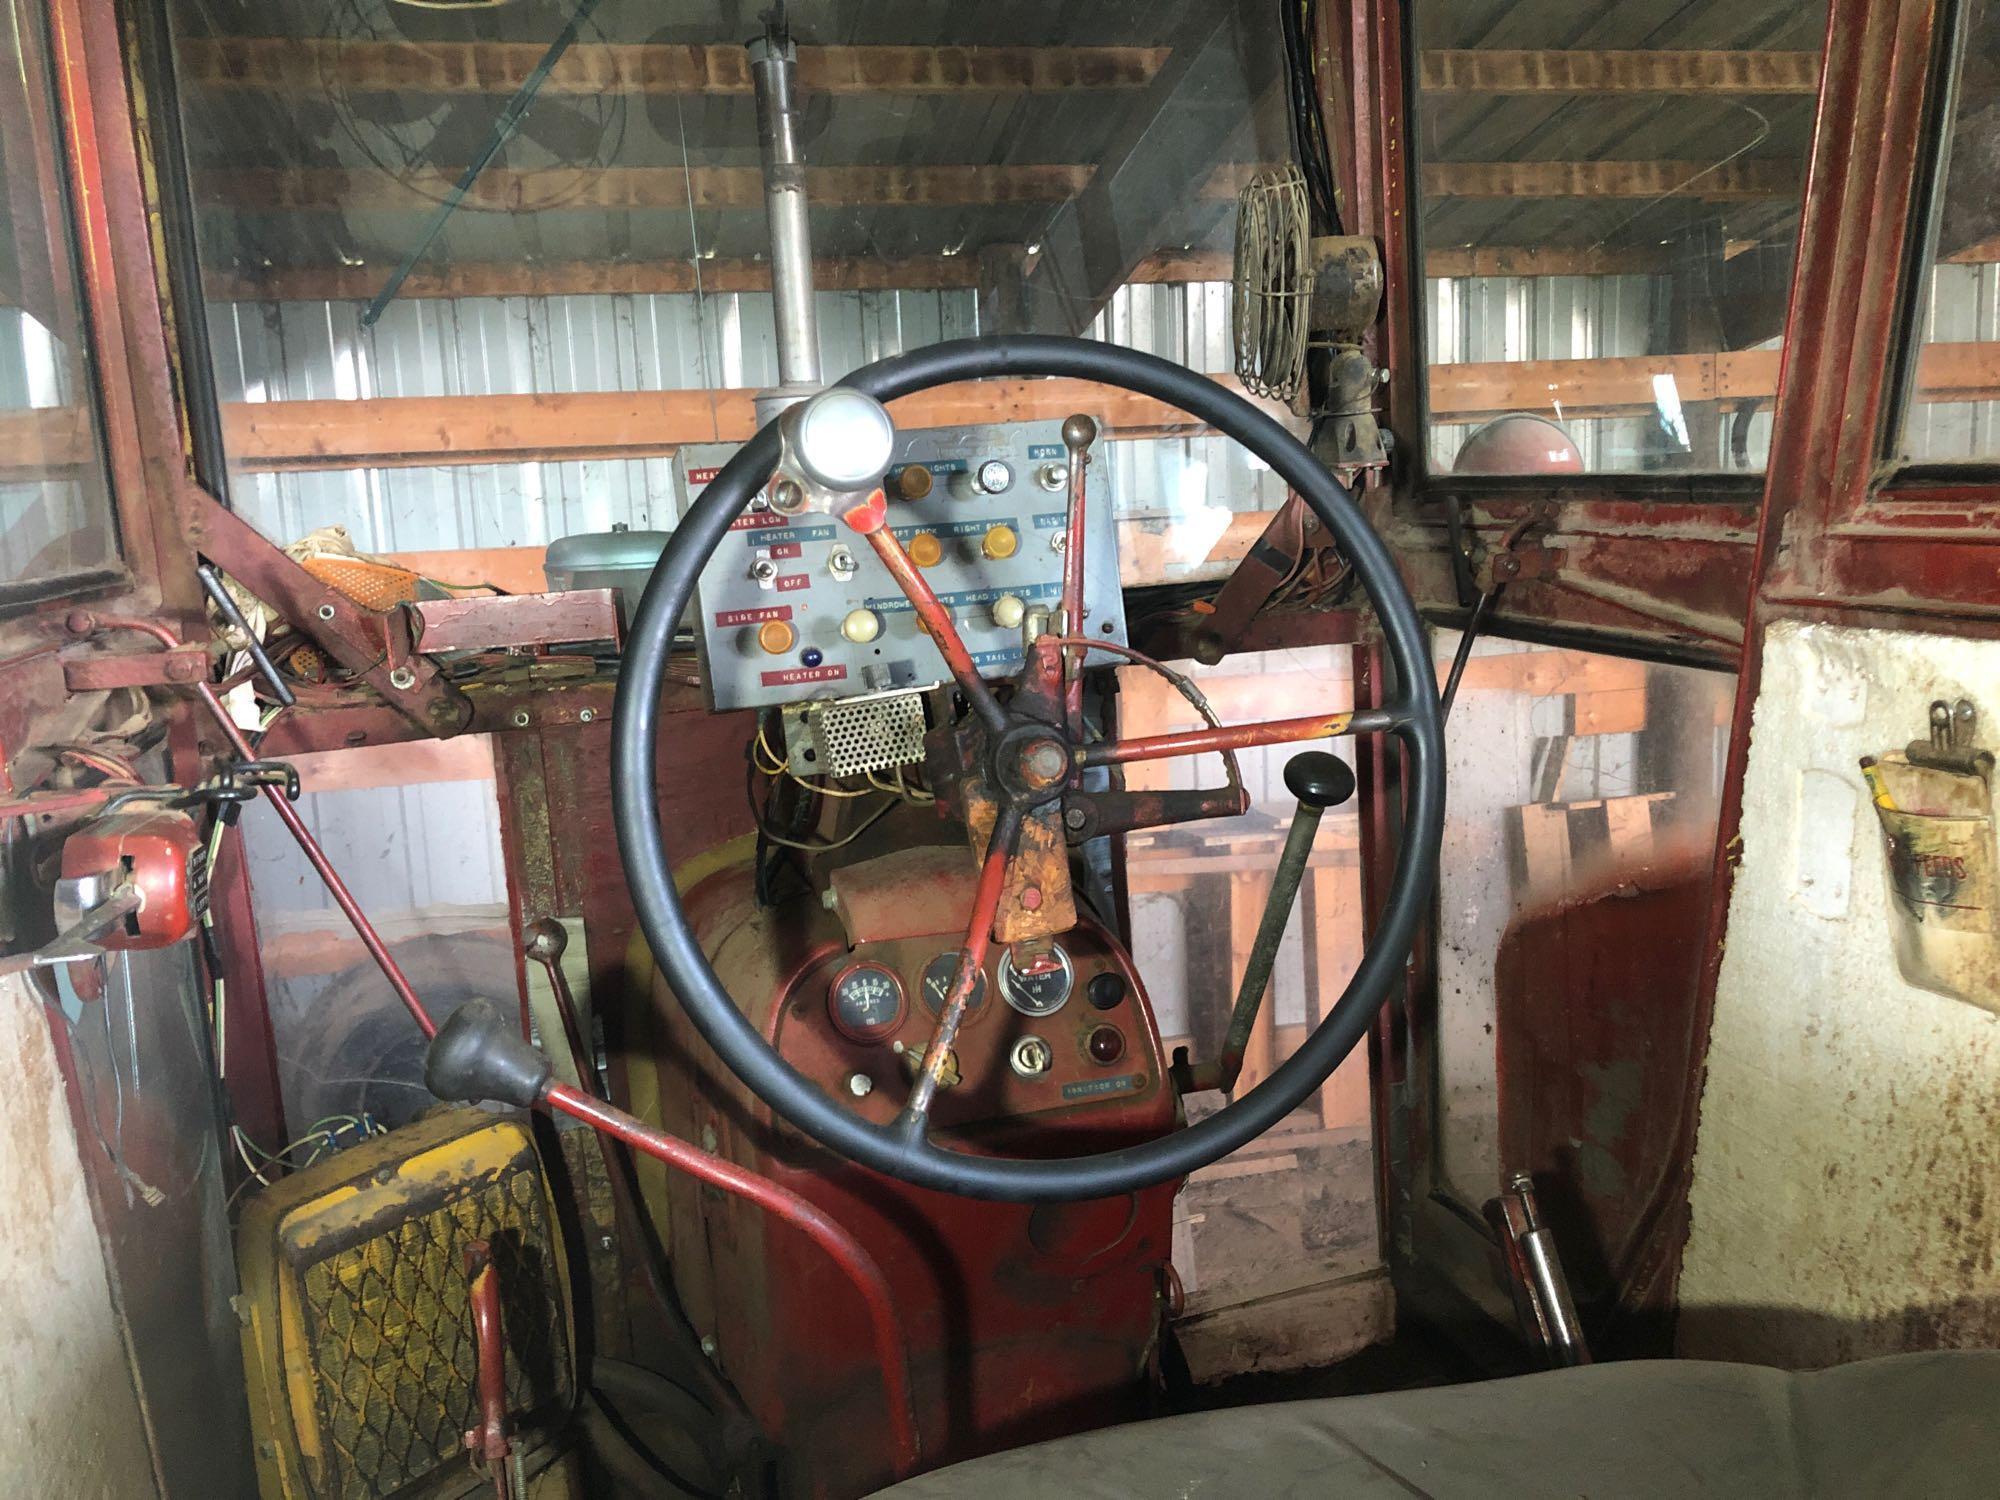 Farmall 400 Wide Front Tractor with Cab and Front Loader, Diesel, SN:4012 S